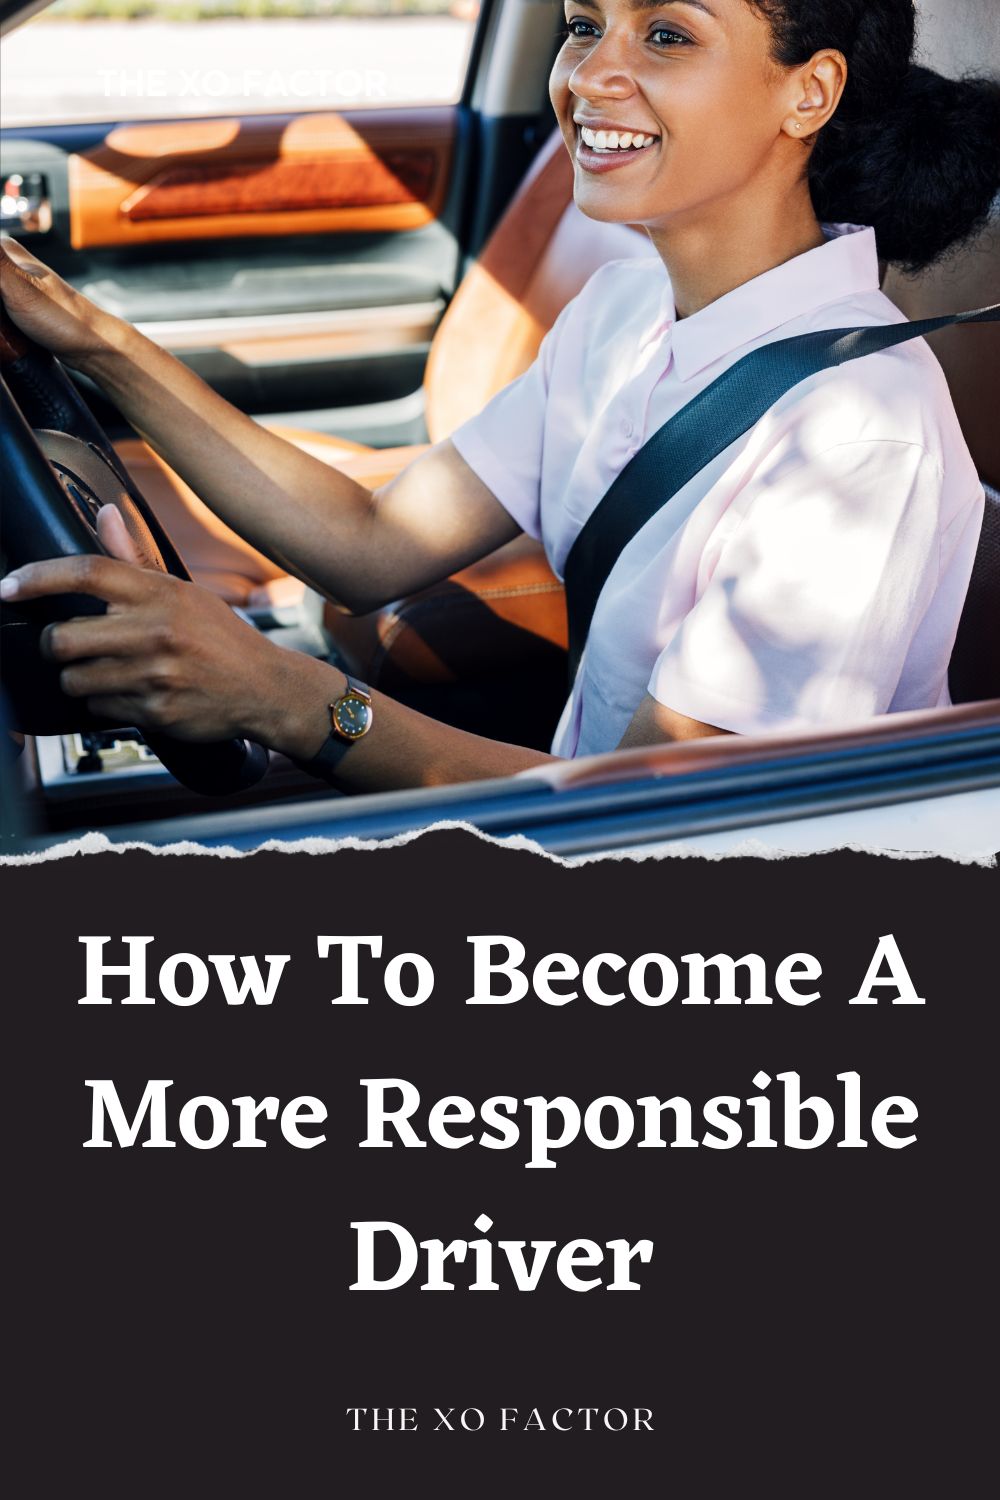 How To Become A More Responsible Driver